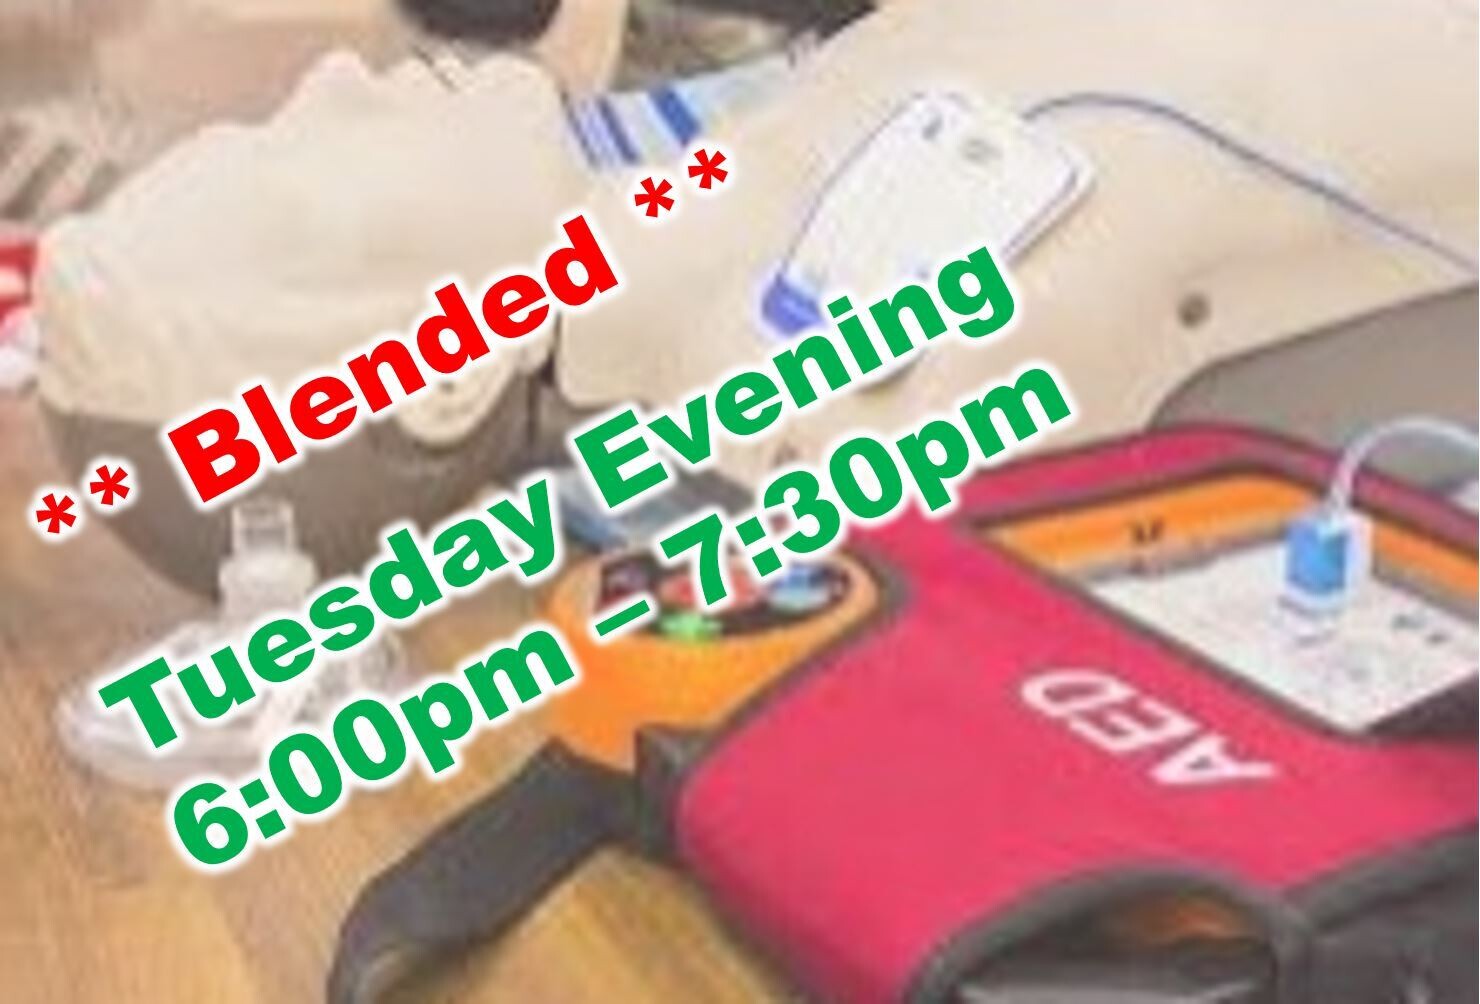 May 17th, 2022 (Tuesday) 6:00pm-7:30pm CPR Class